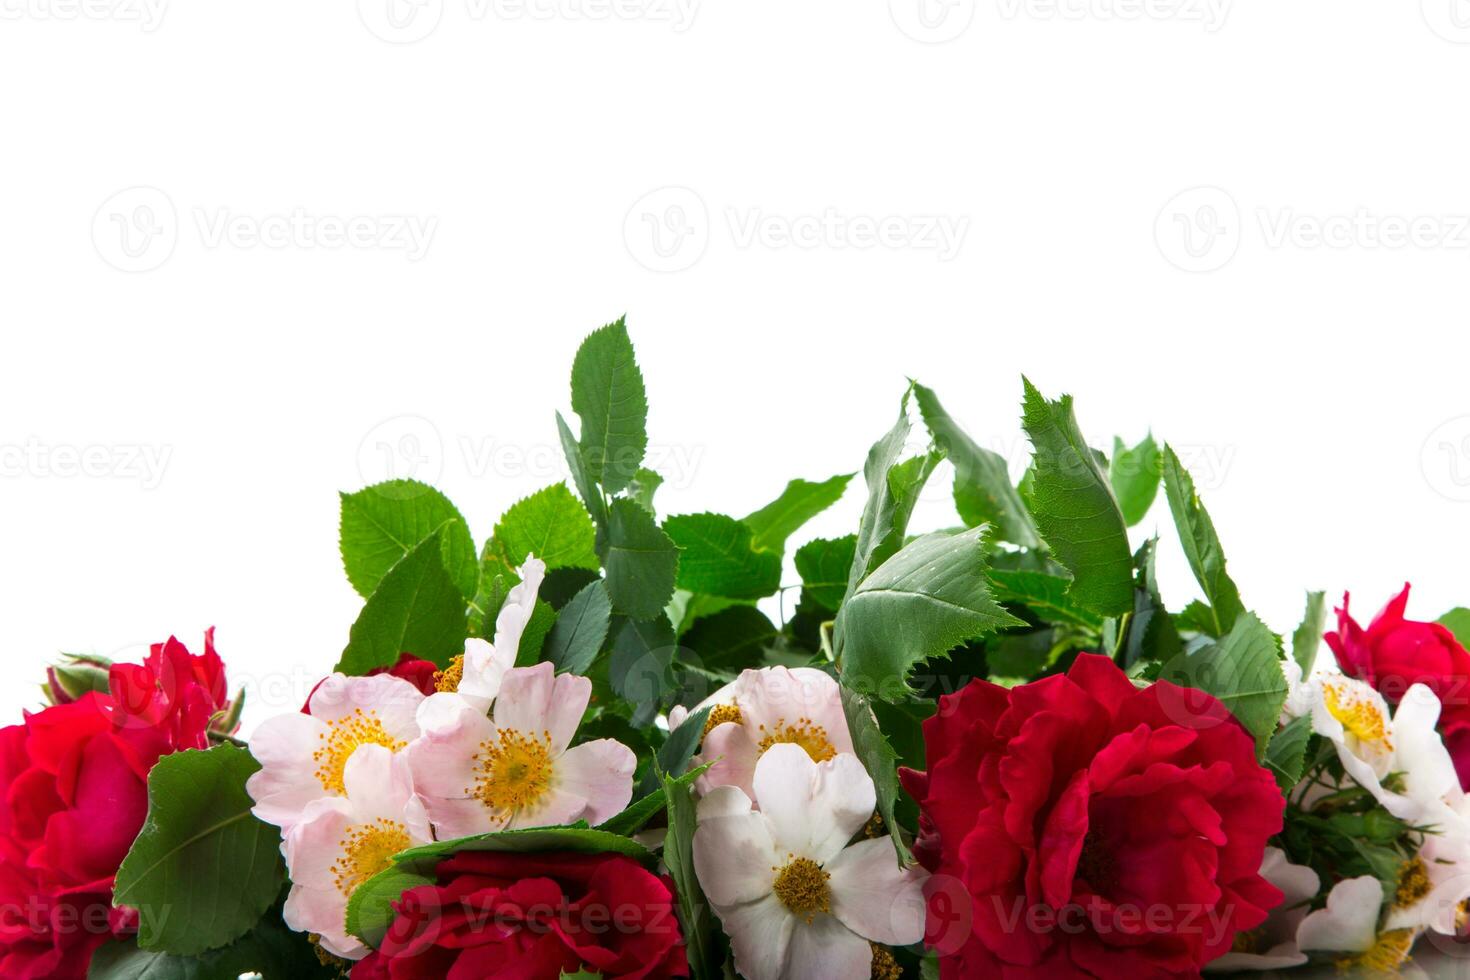 background of many red roses on white background photo